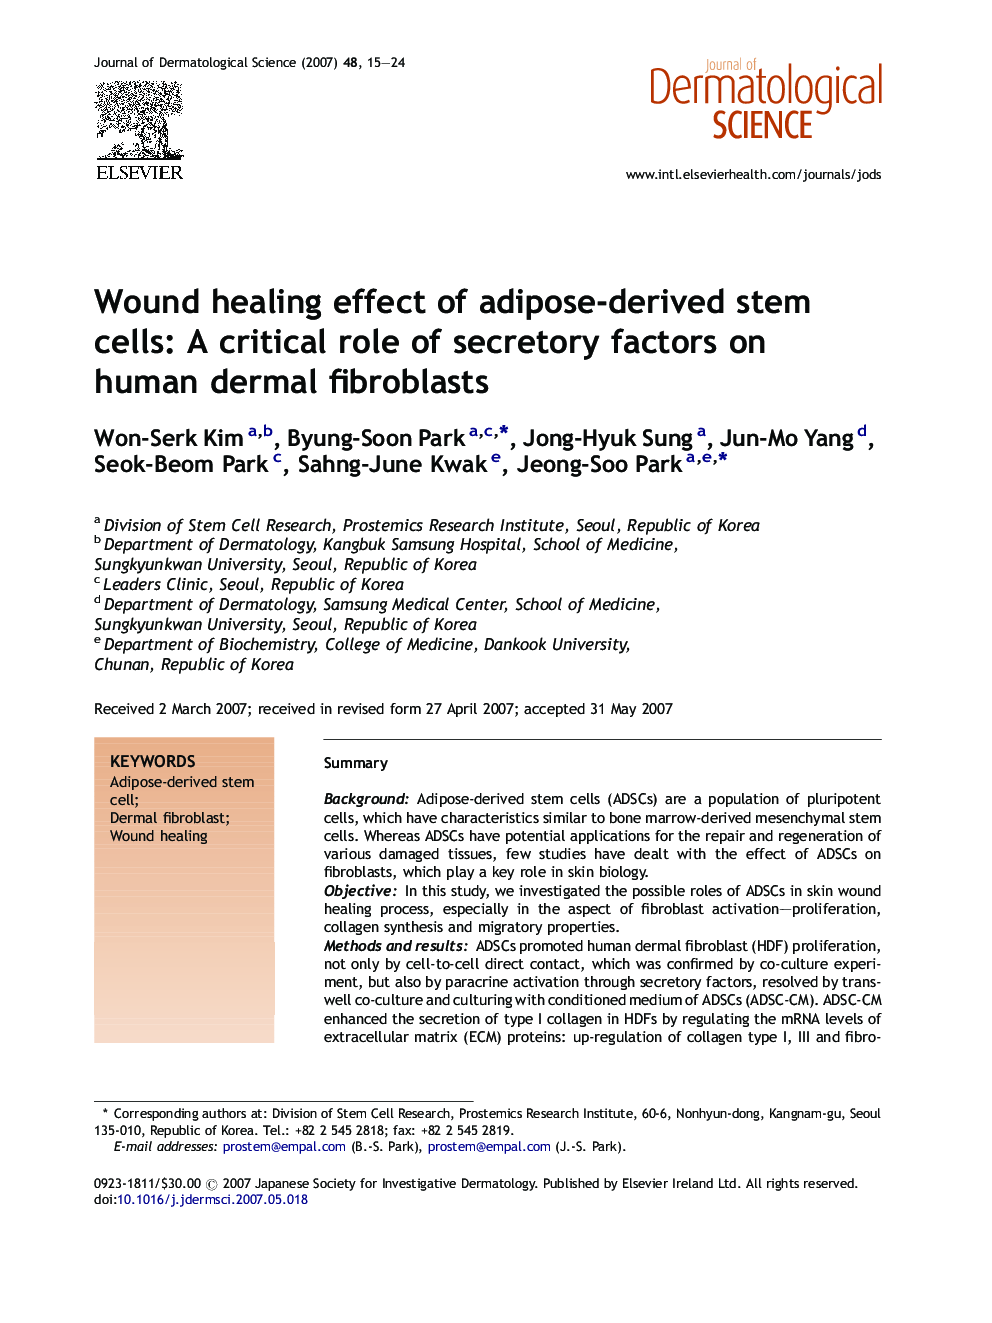 Wound healing effect of adipose-derived stem cells: A critical role of secretory factors on human dermal fibroblasts